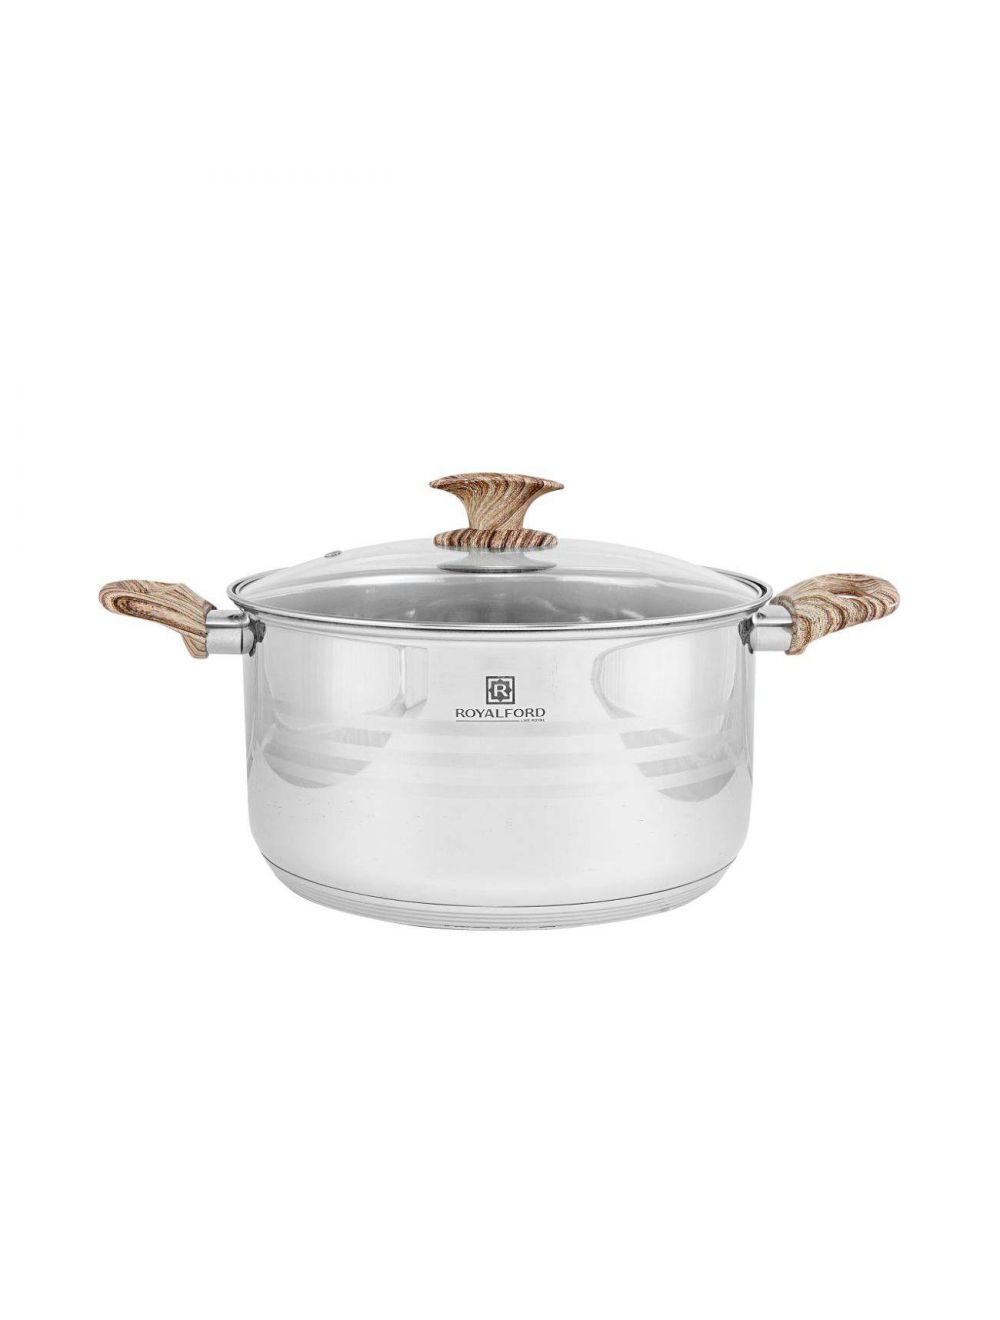 Royalford RF8548 24cm Stainless Steel Casserole with Glass Lid